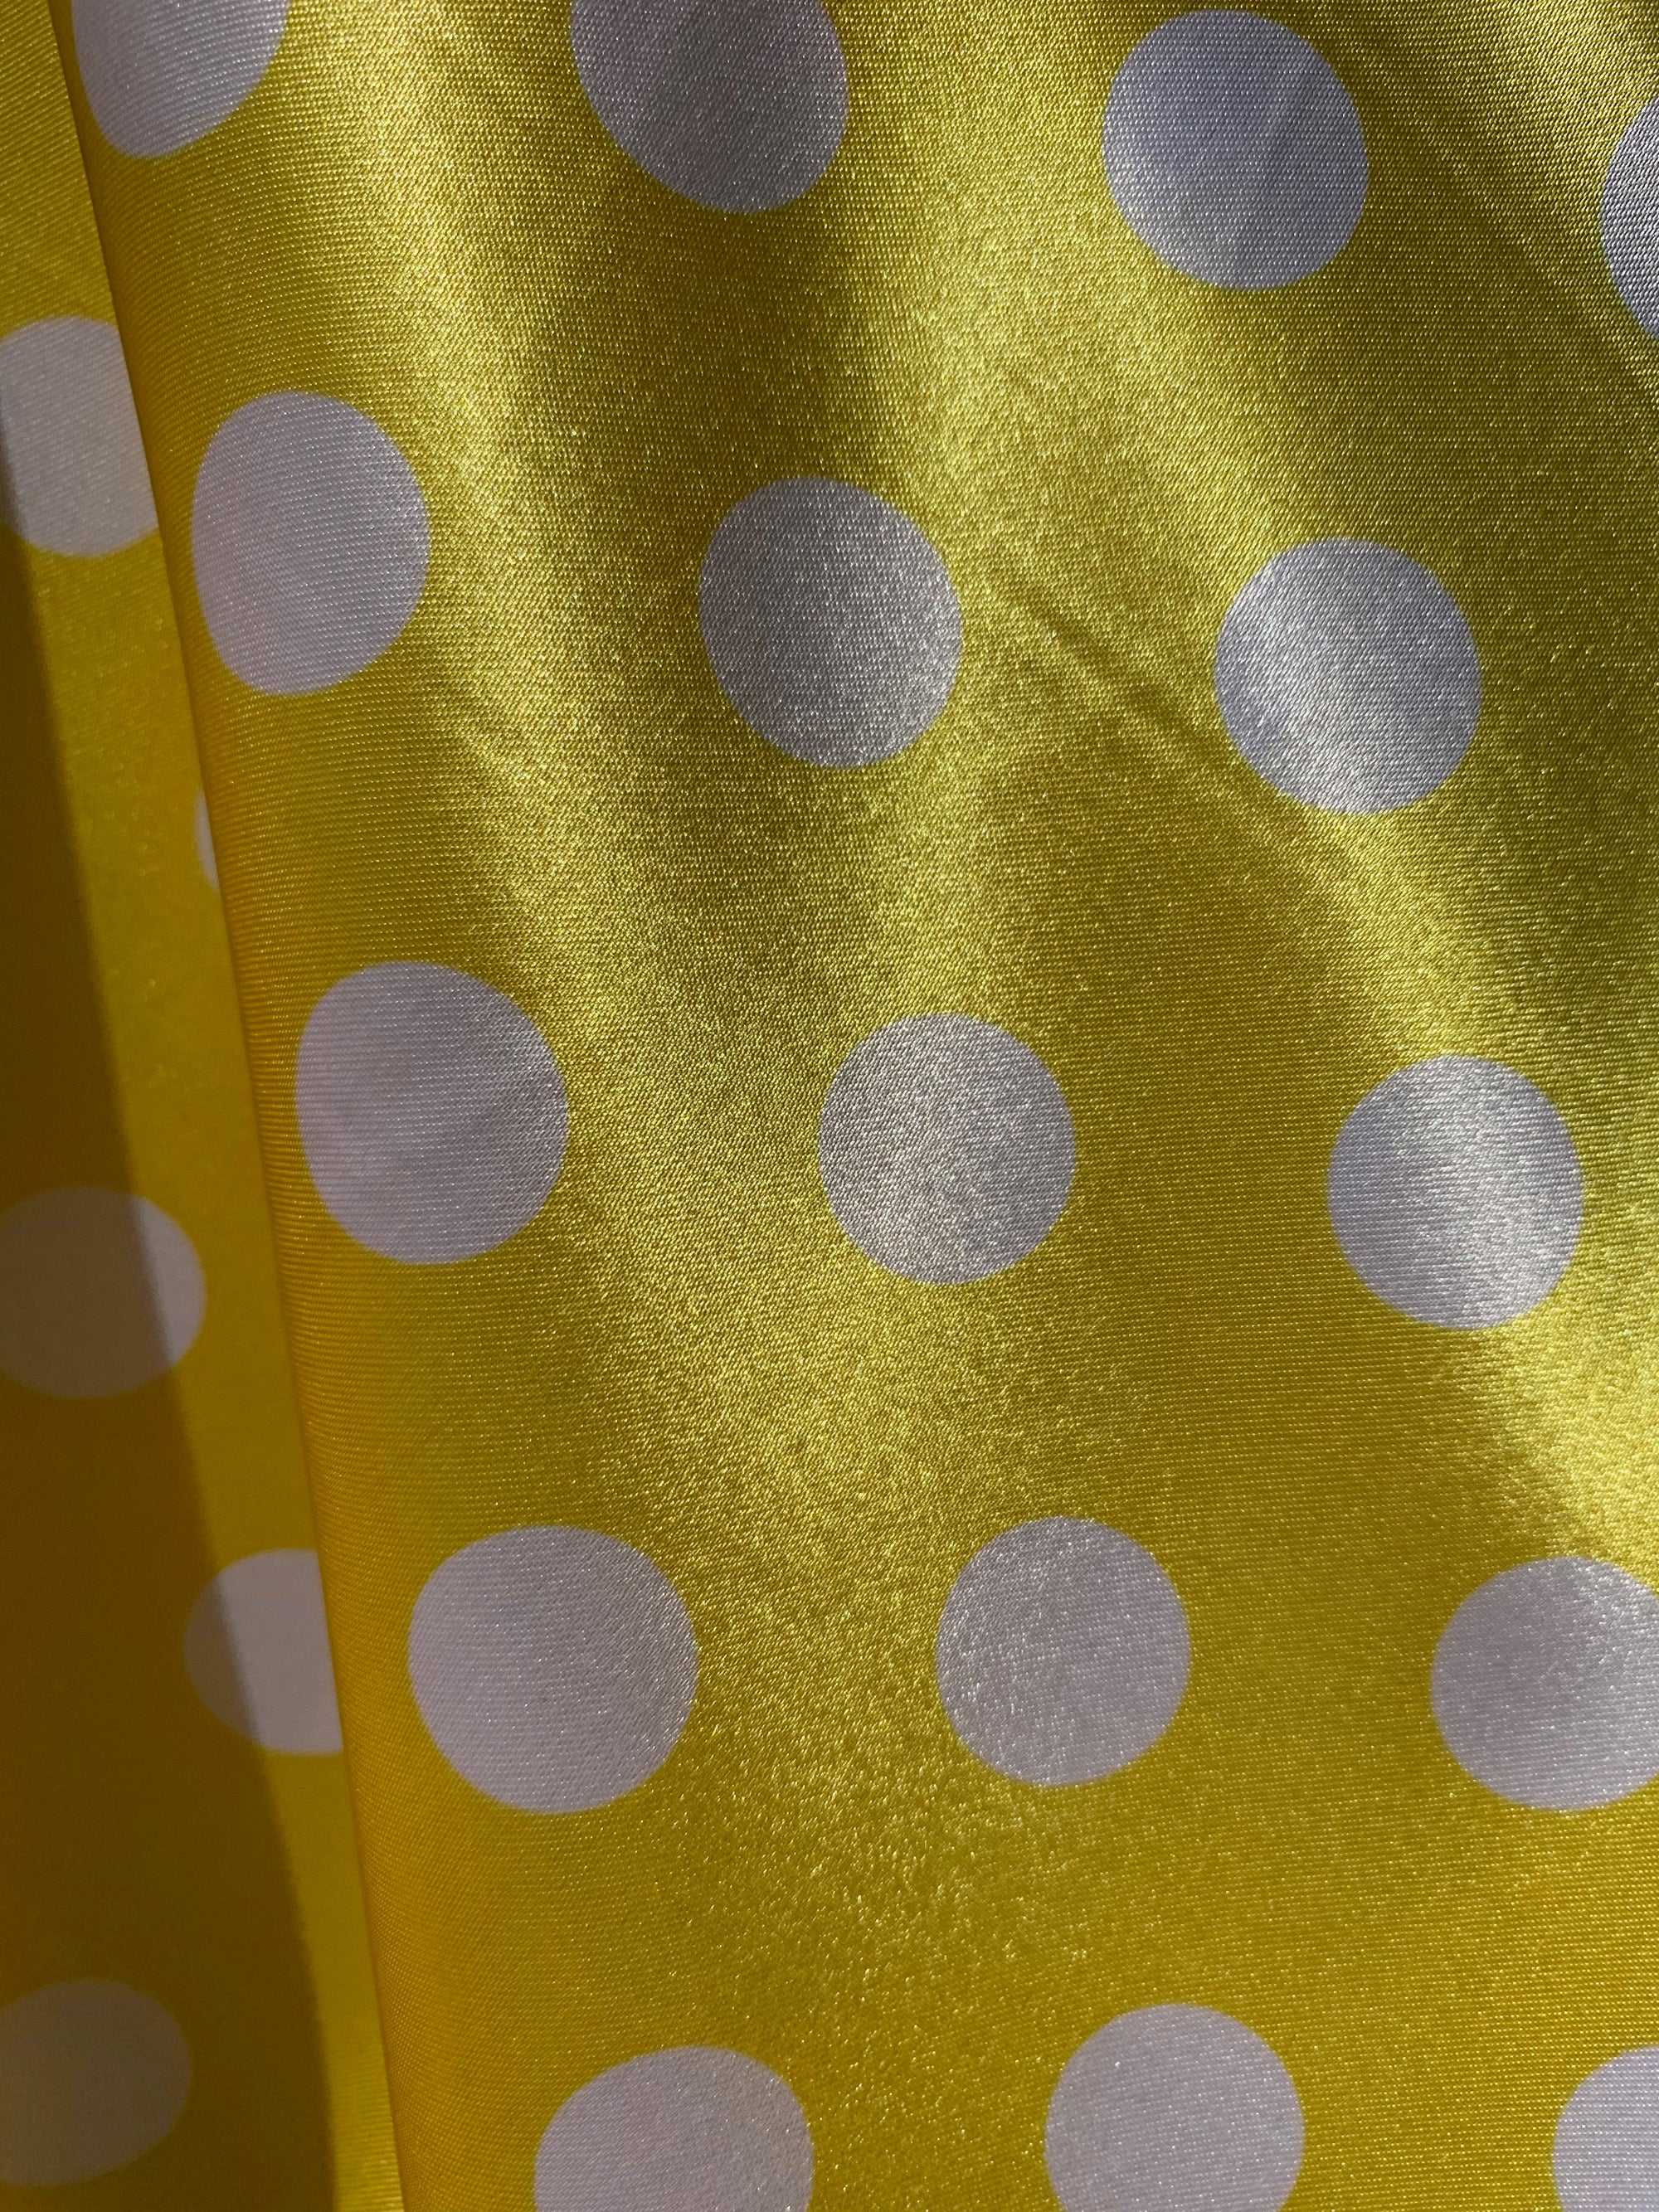 Shelby 0.75" WHITE Polka Dots on YELLOW Polyester Light Weight Satin Fabric